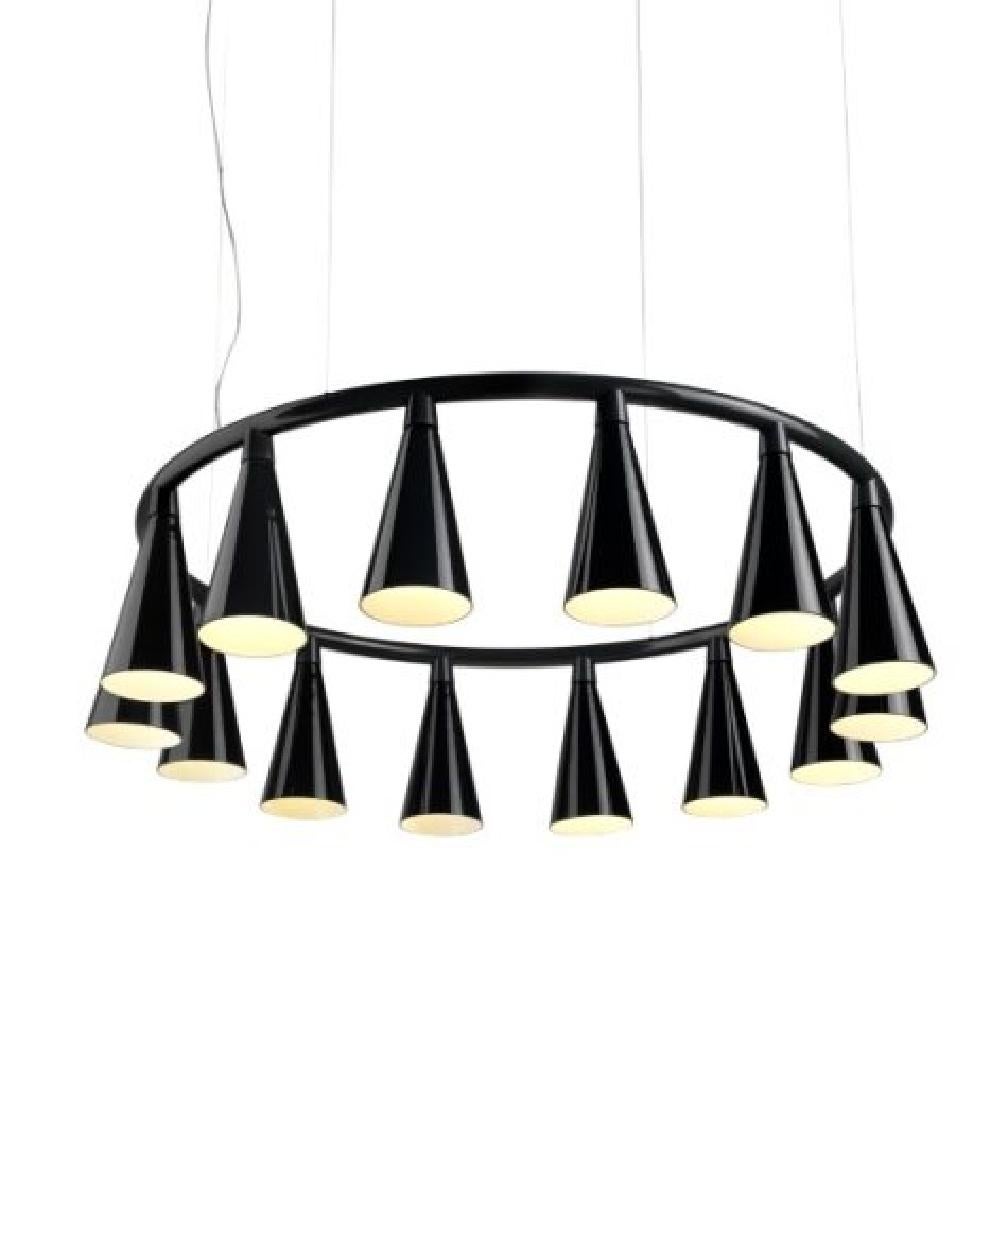 KOMORI Set 02 chandelier by Nendo for Wonderglass In New Condition For Sale In Brooklyn, NY